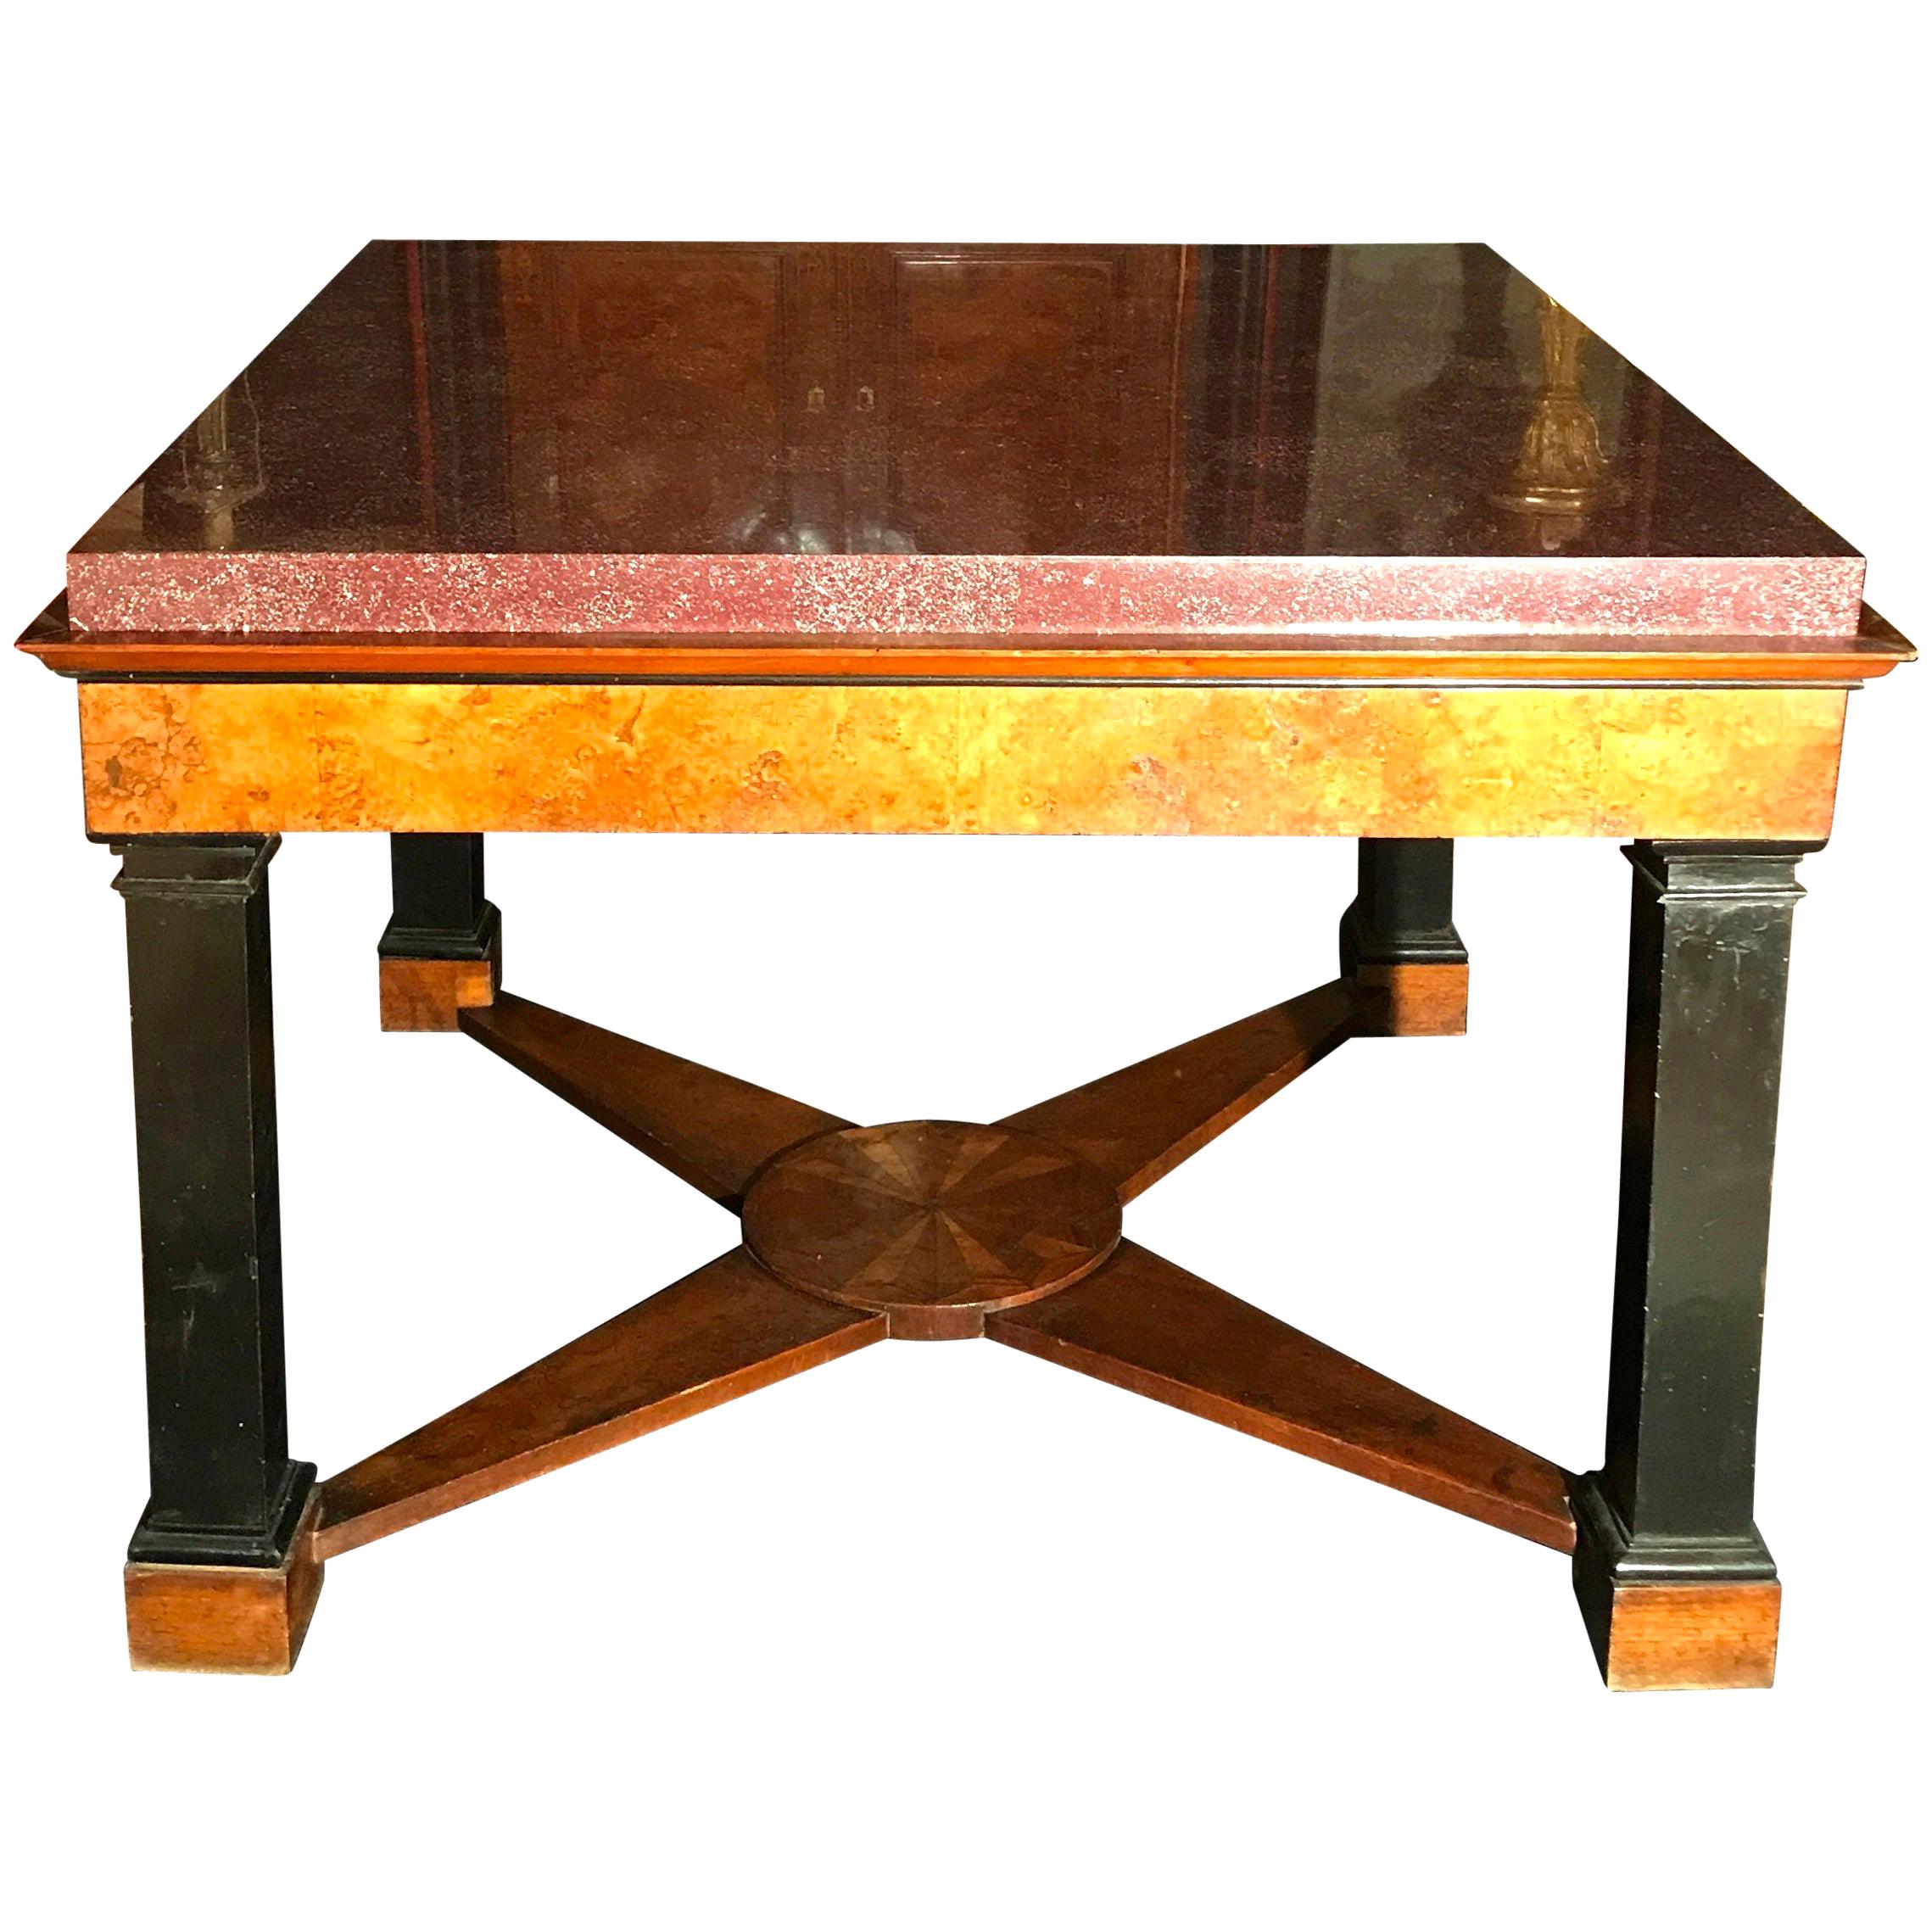 Neoclassical Italian Center Table with Imperial Porphyry Marble Tabletop For Sale